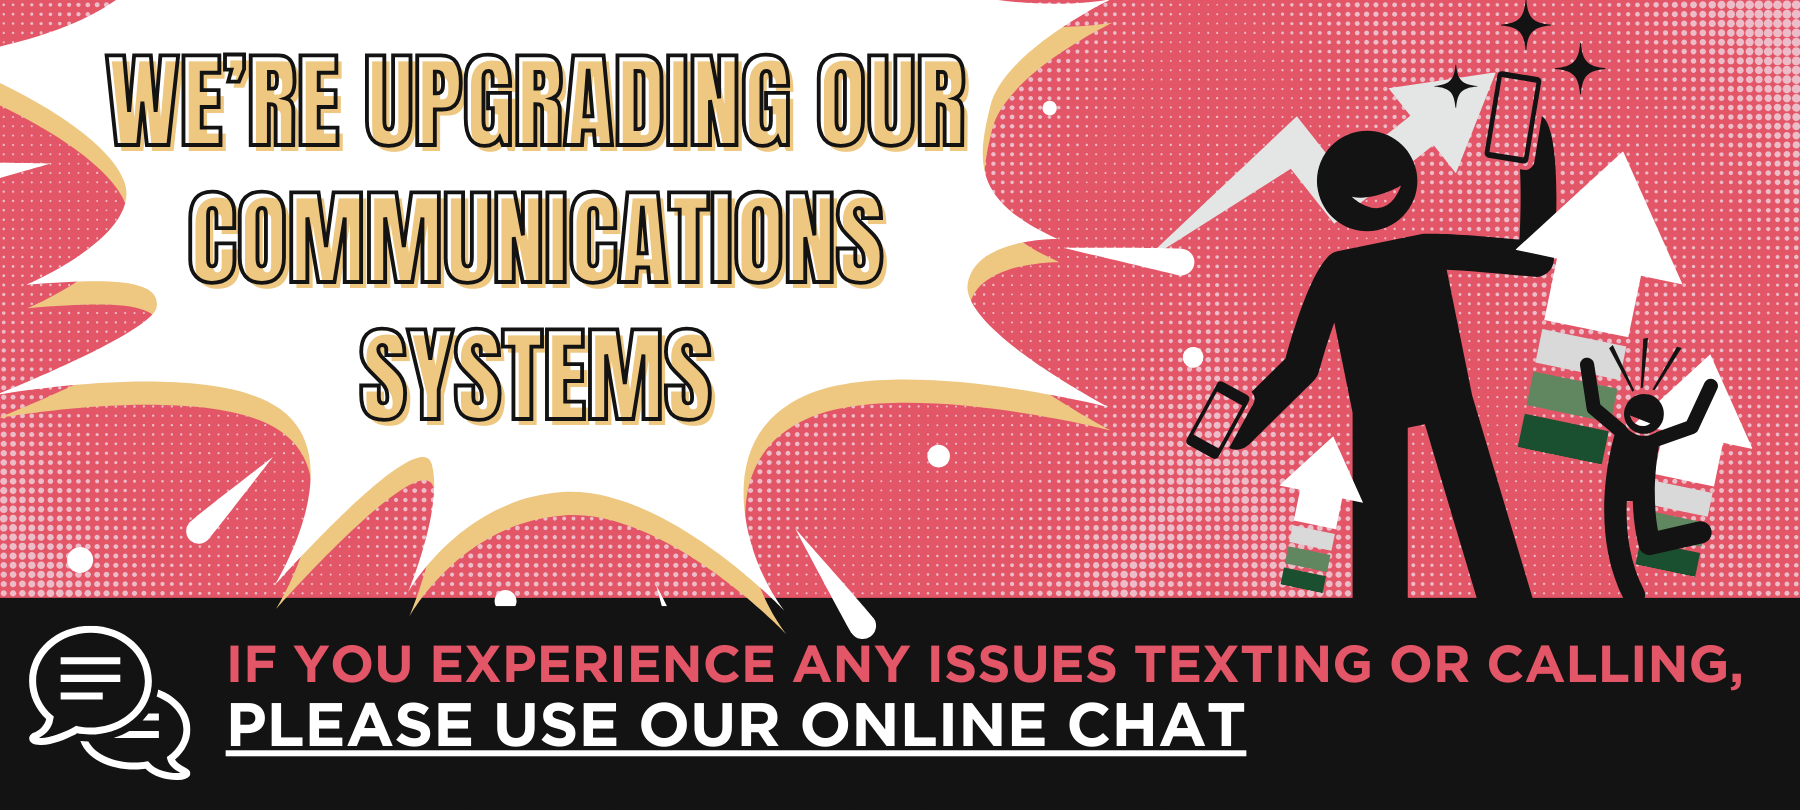 We're Upgrading Our Communications Systems. If you experience any issues texting or calling, please use our online chat to reach us.